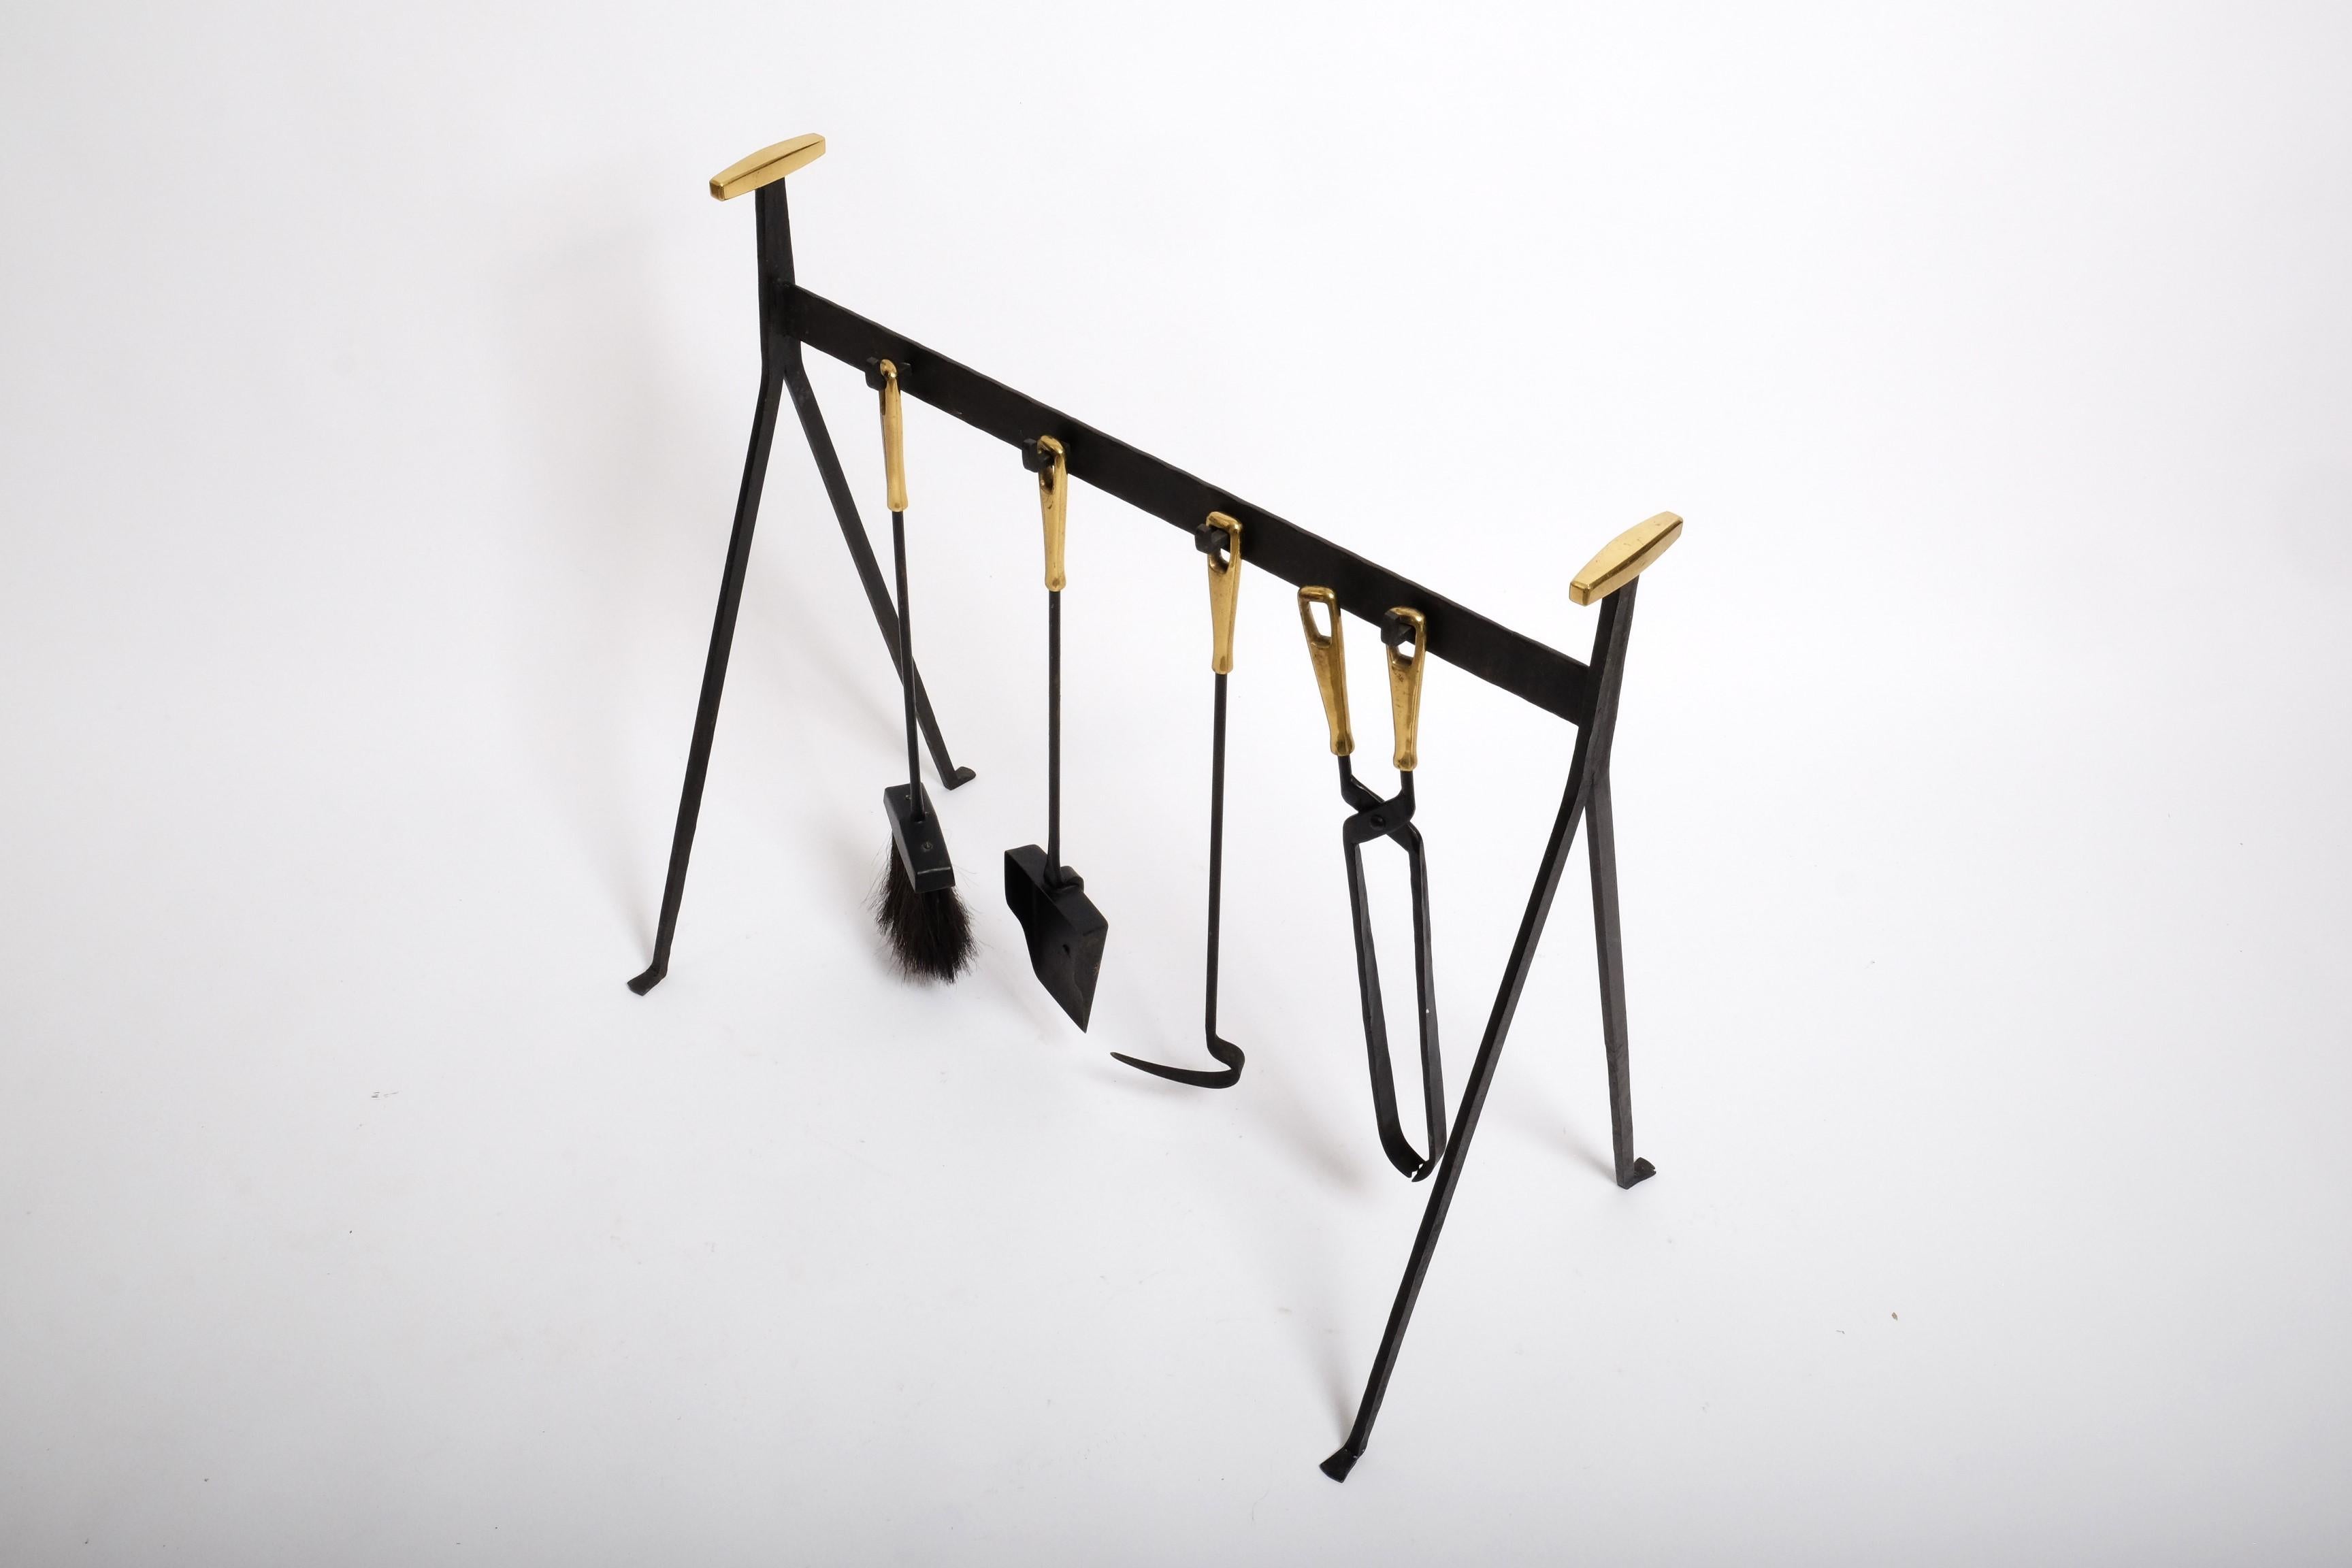 Great mid-century modern fireplace tool set by Vereinigte Werkstätten, made in Germany, 1960s. 

The fireplace tool set consists of a shovel, brush, hook, tongs and a stand. The fireplace tools and stand are made of blackened iron with brass